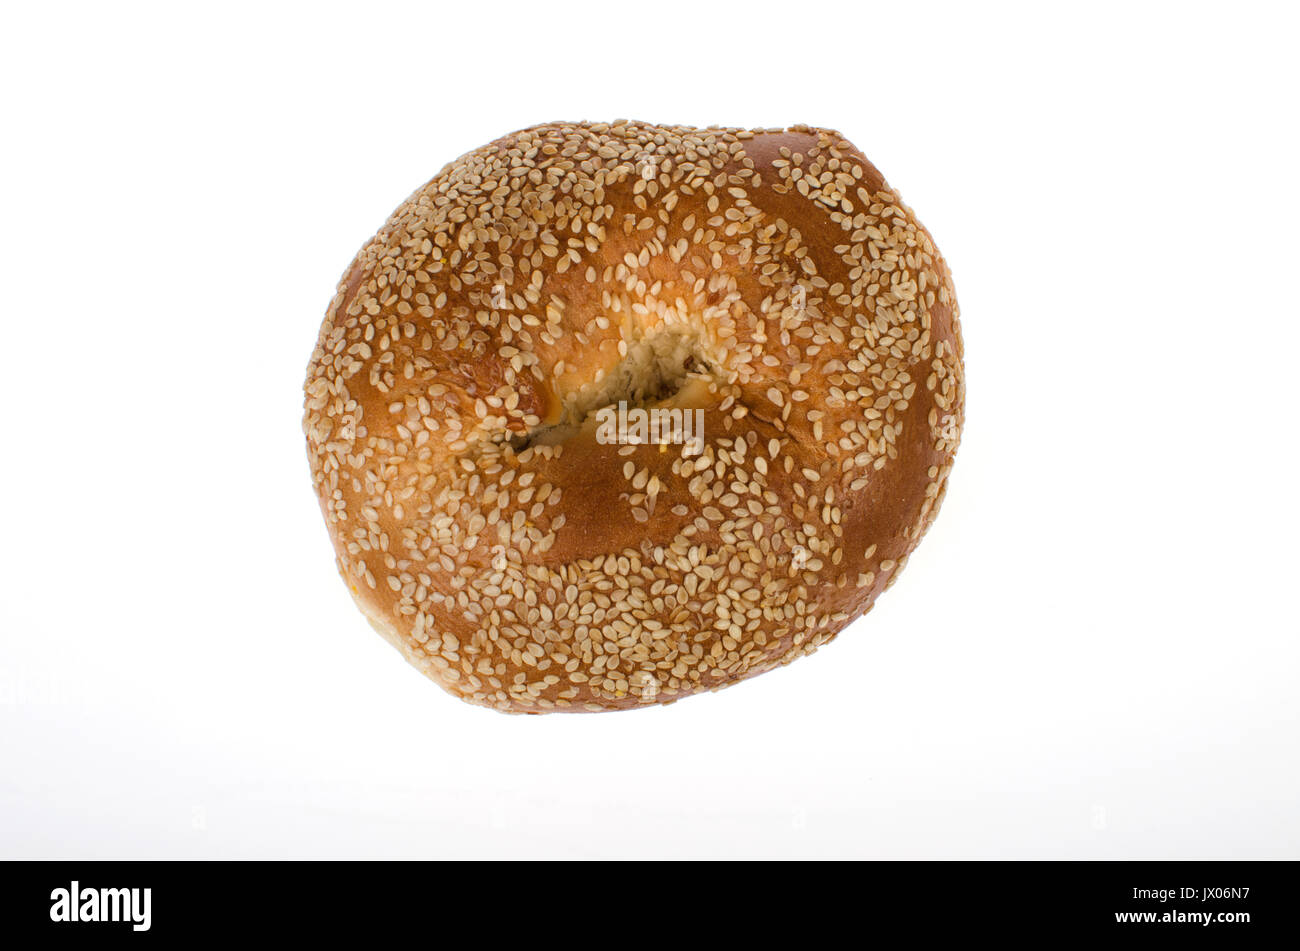 Single Sesame seed bagel on white background, cut out. Stock Photo